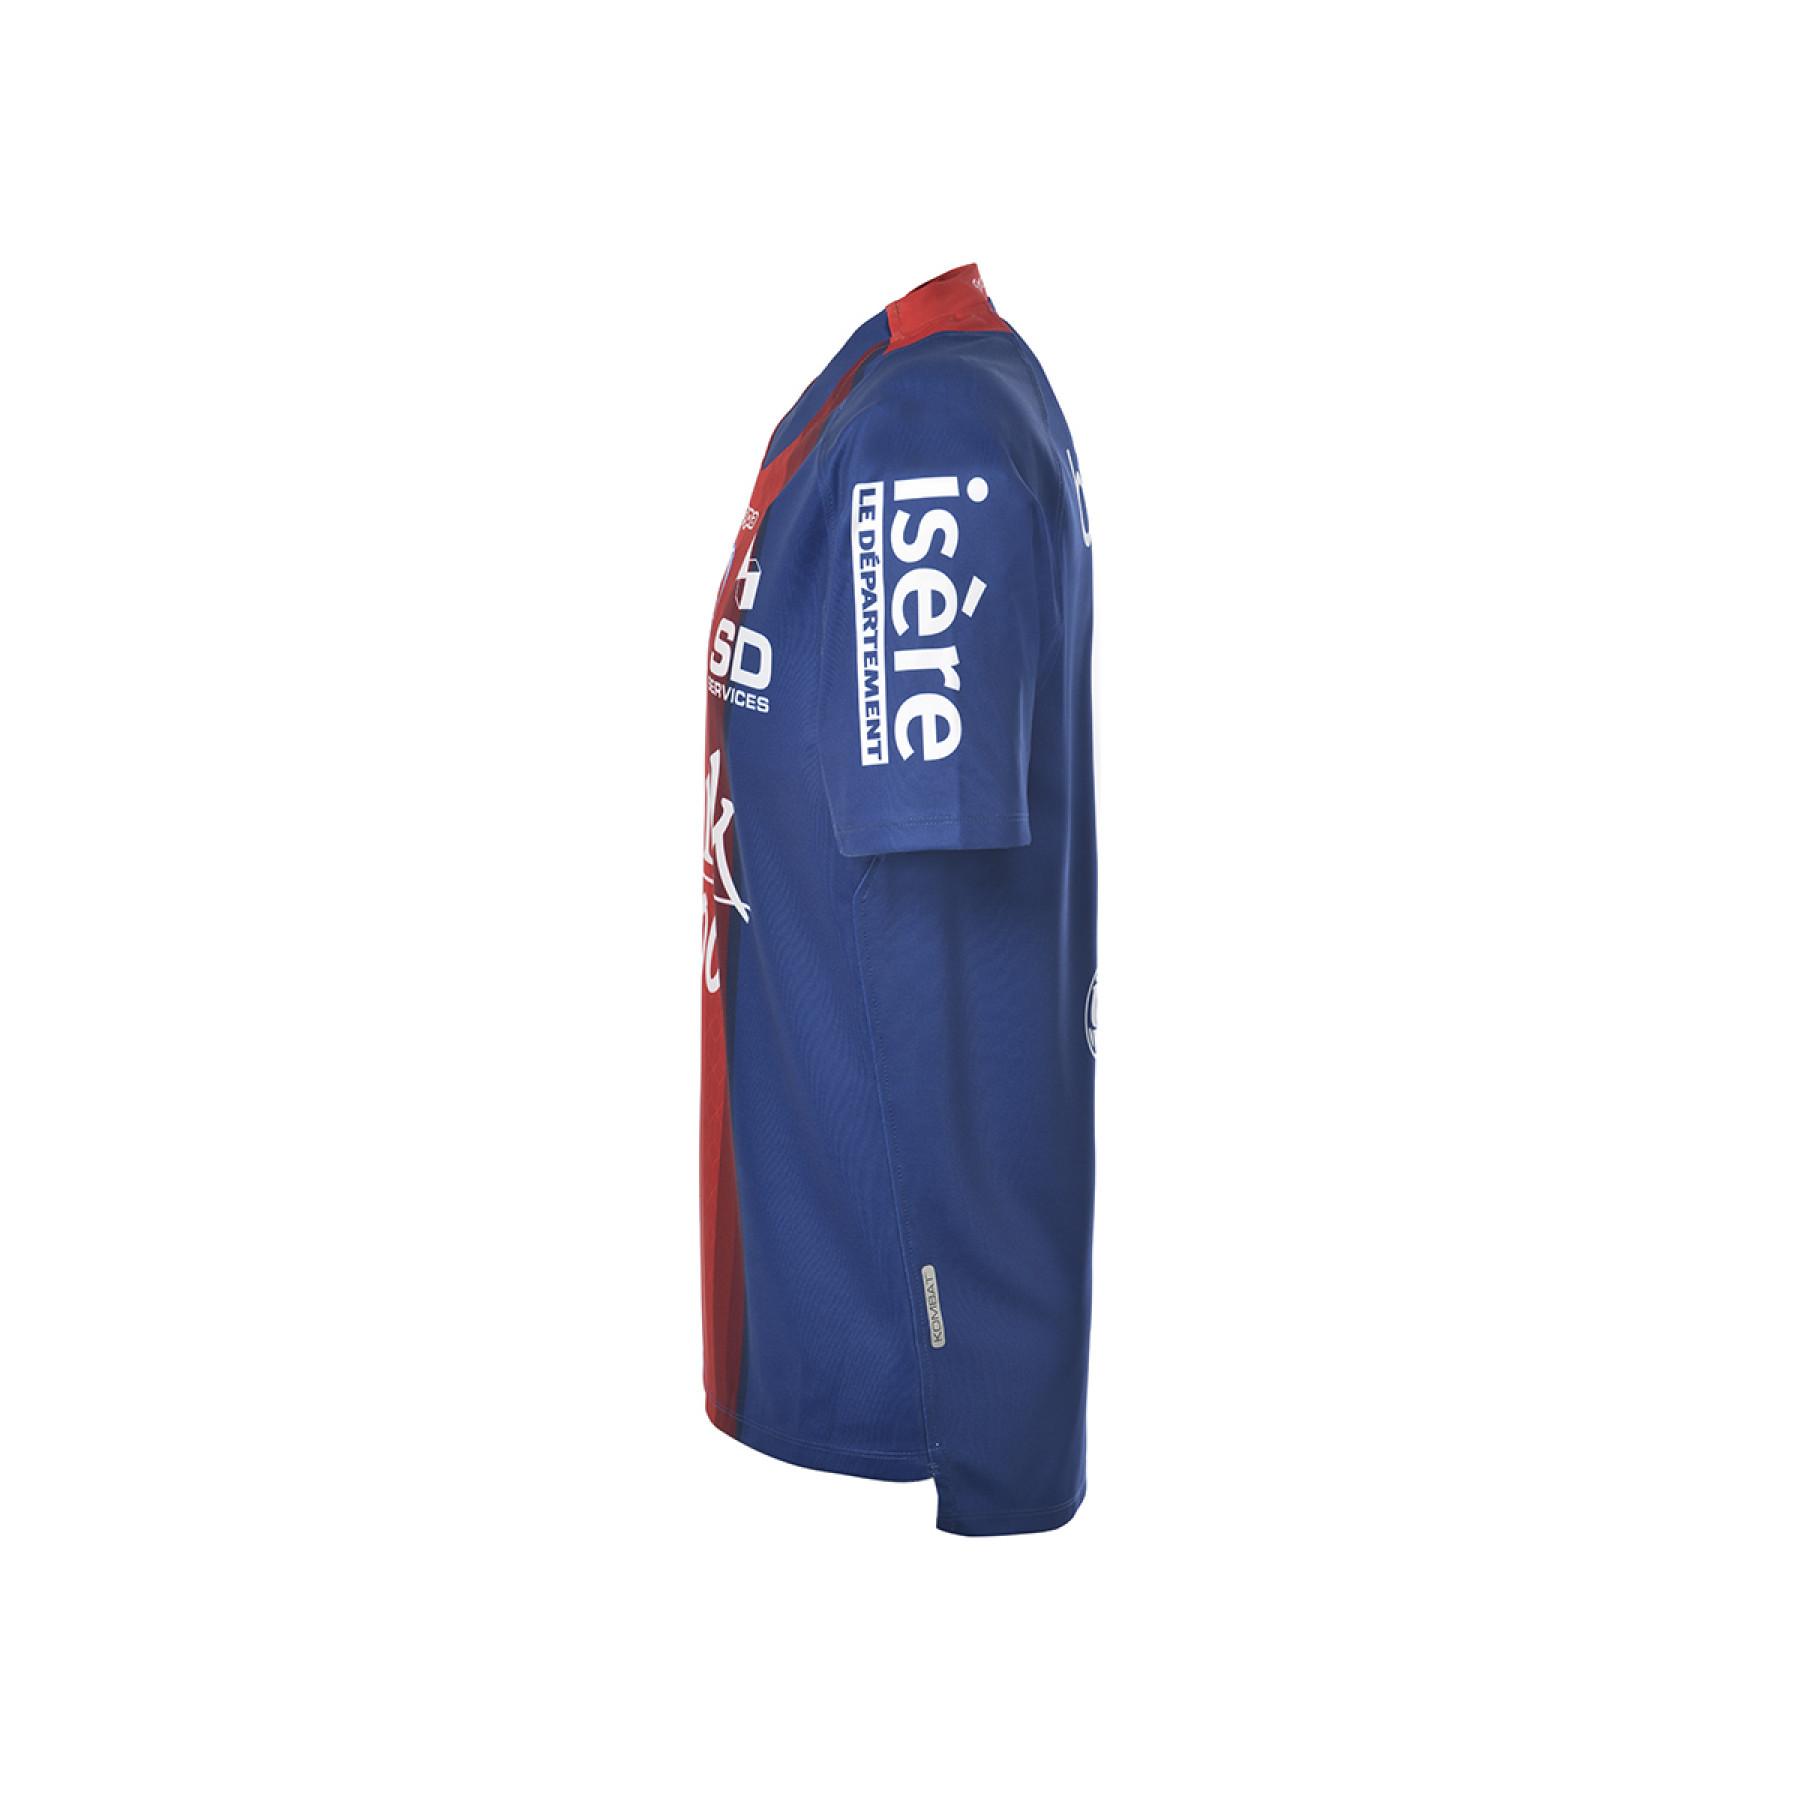 Home jersey FC Grenoble Rugby 2019/20